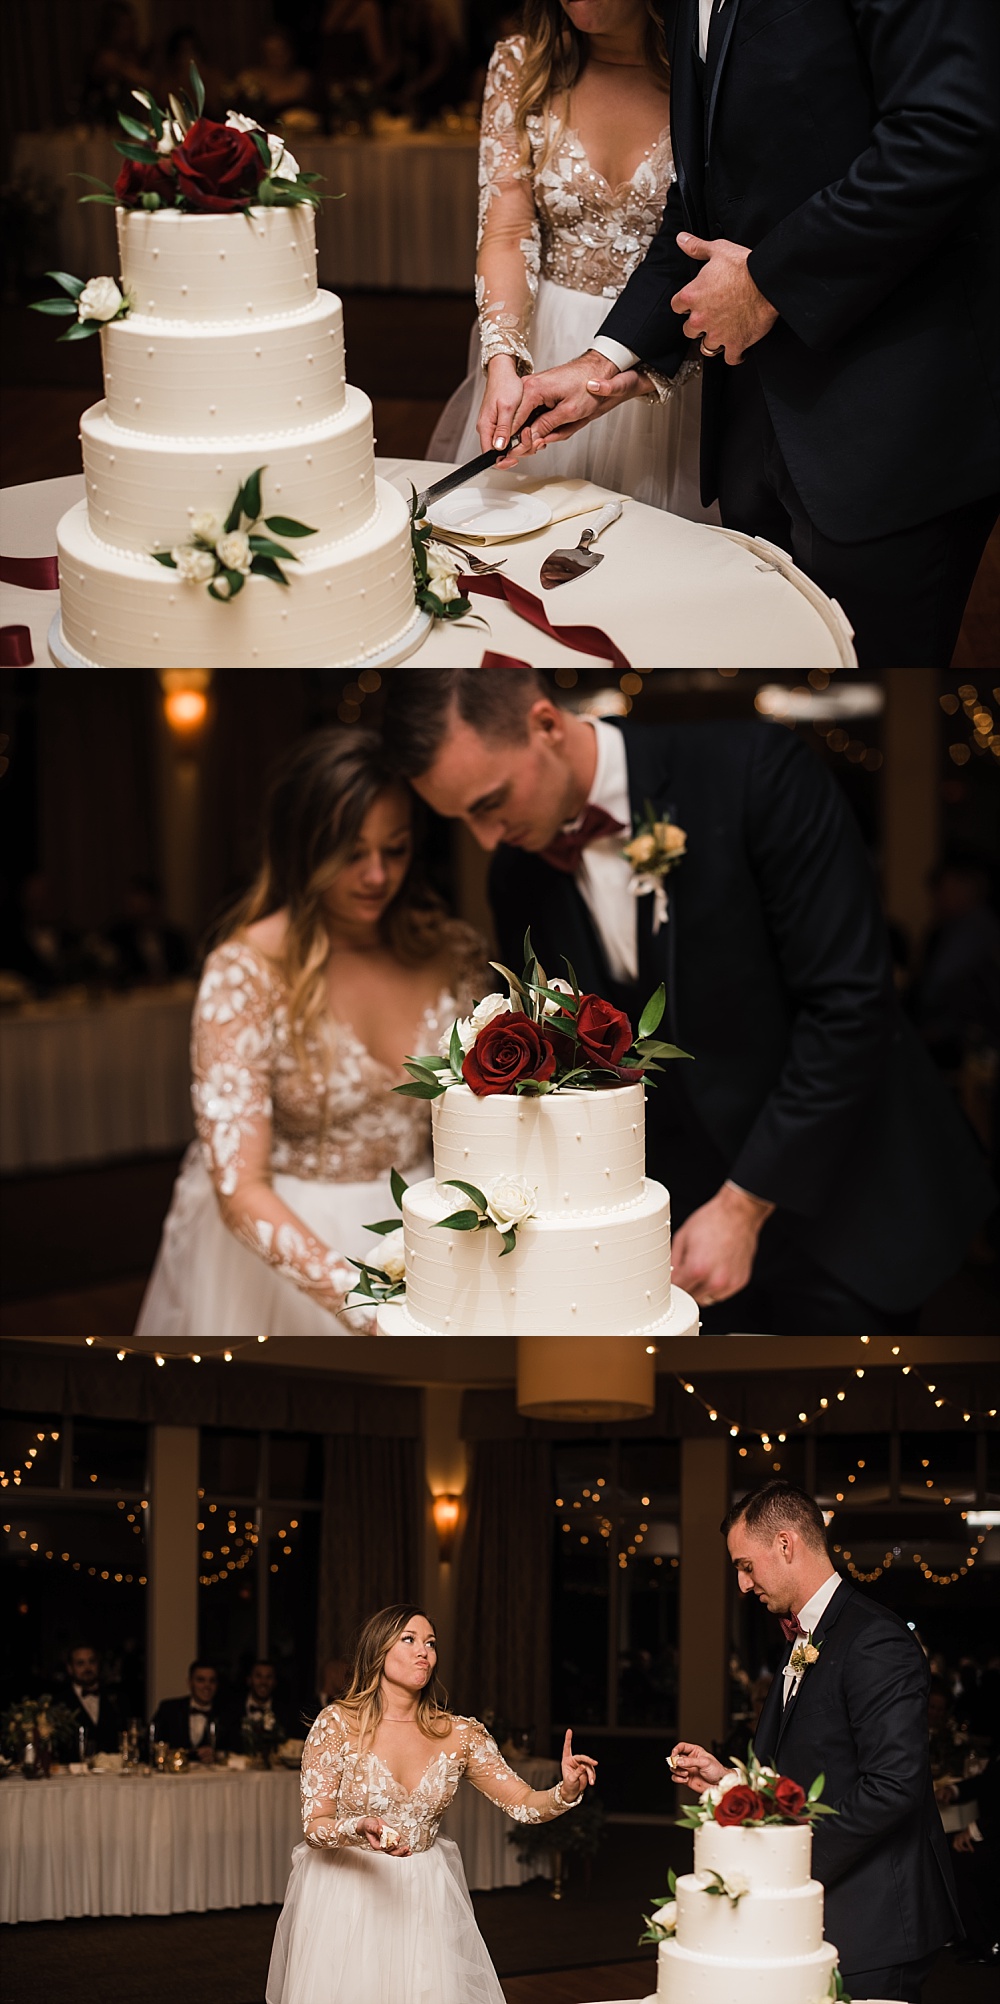 Bride and groom cutting their cake during their wedding reception at Scioto Reserve Country Club